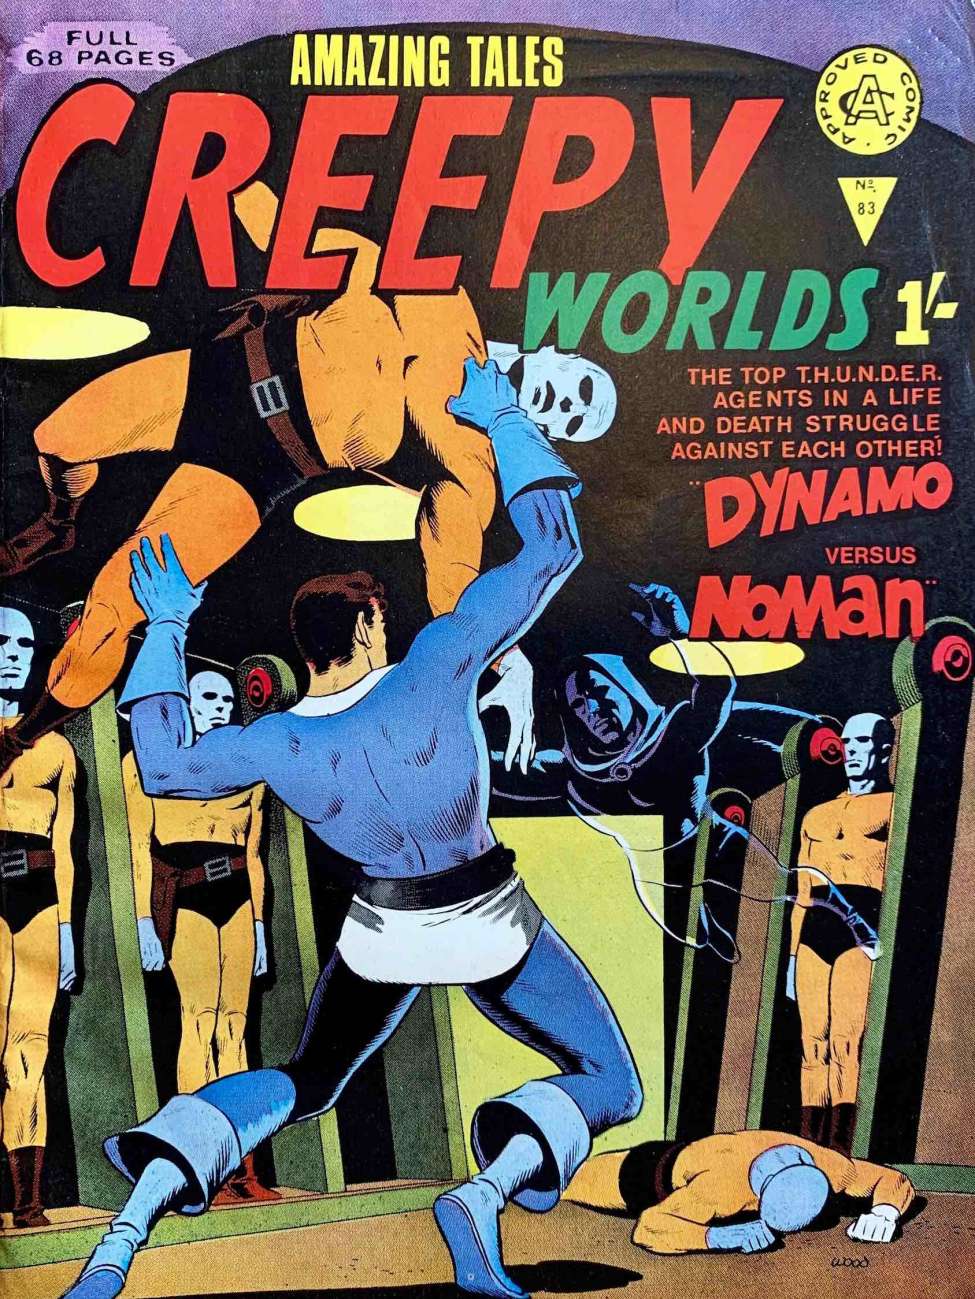 Book Cover For Creepy Worlds 83